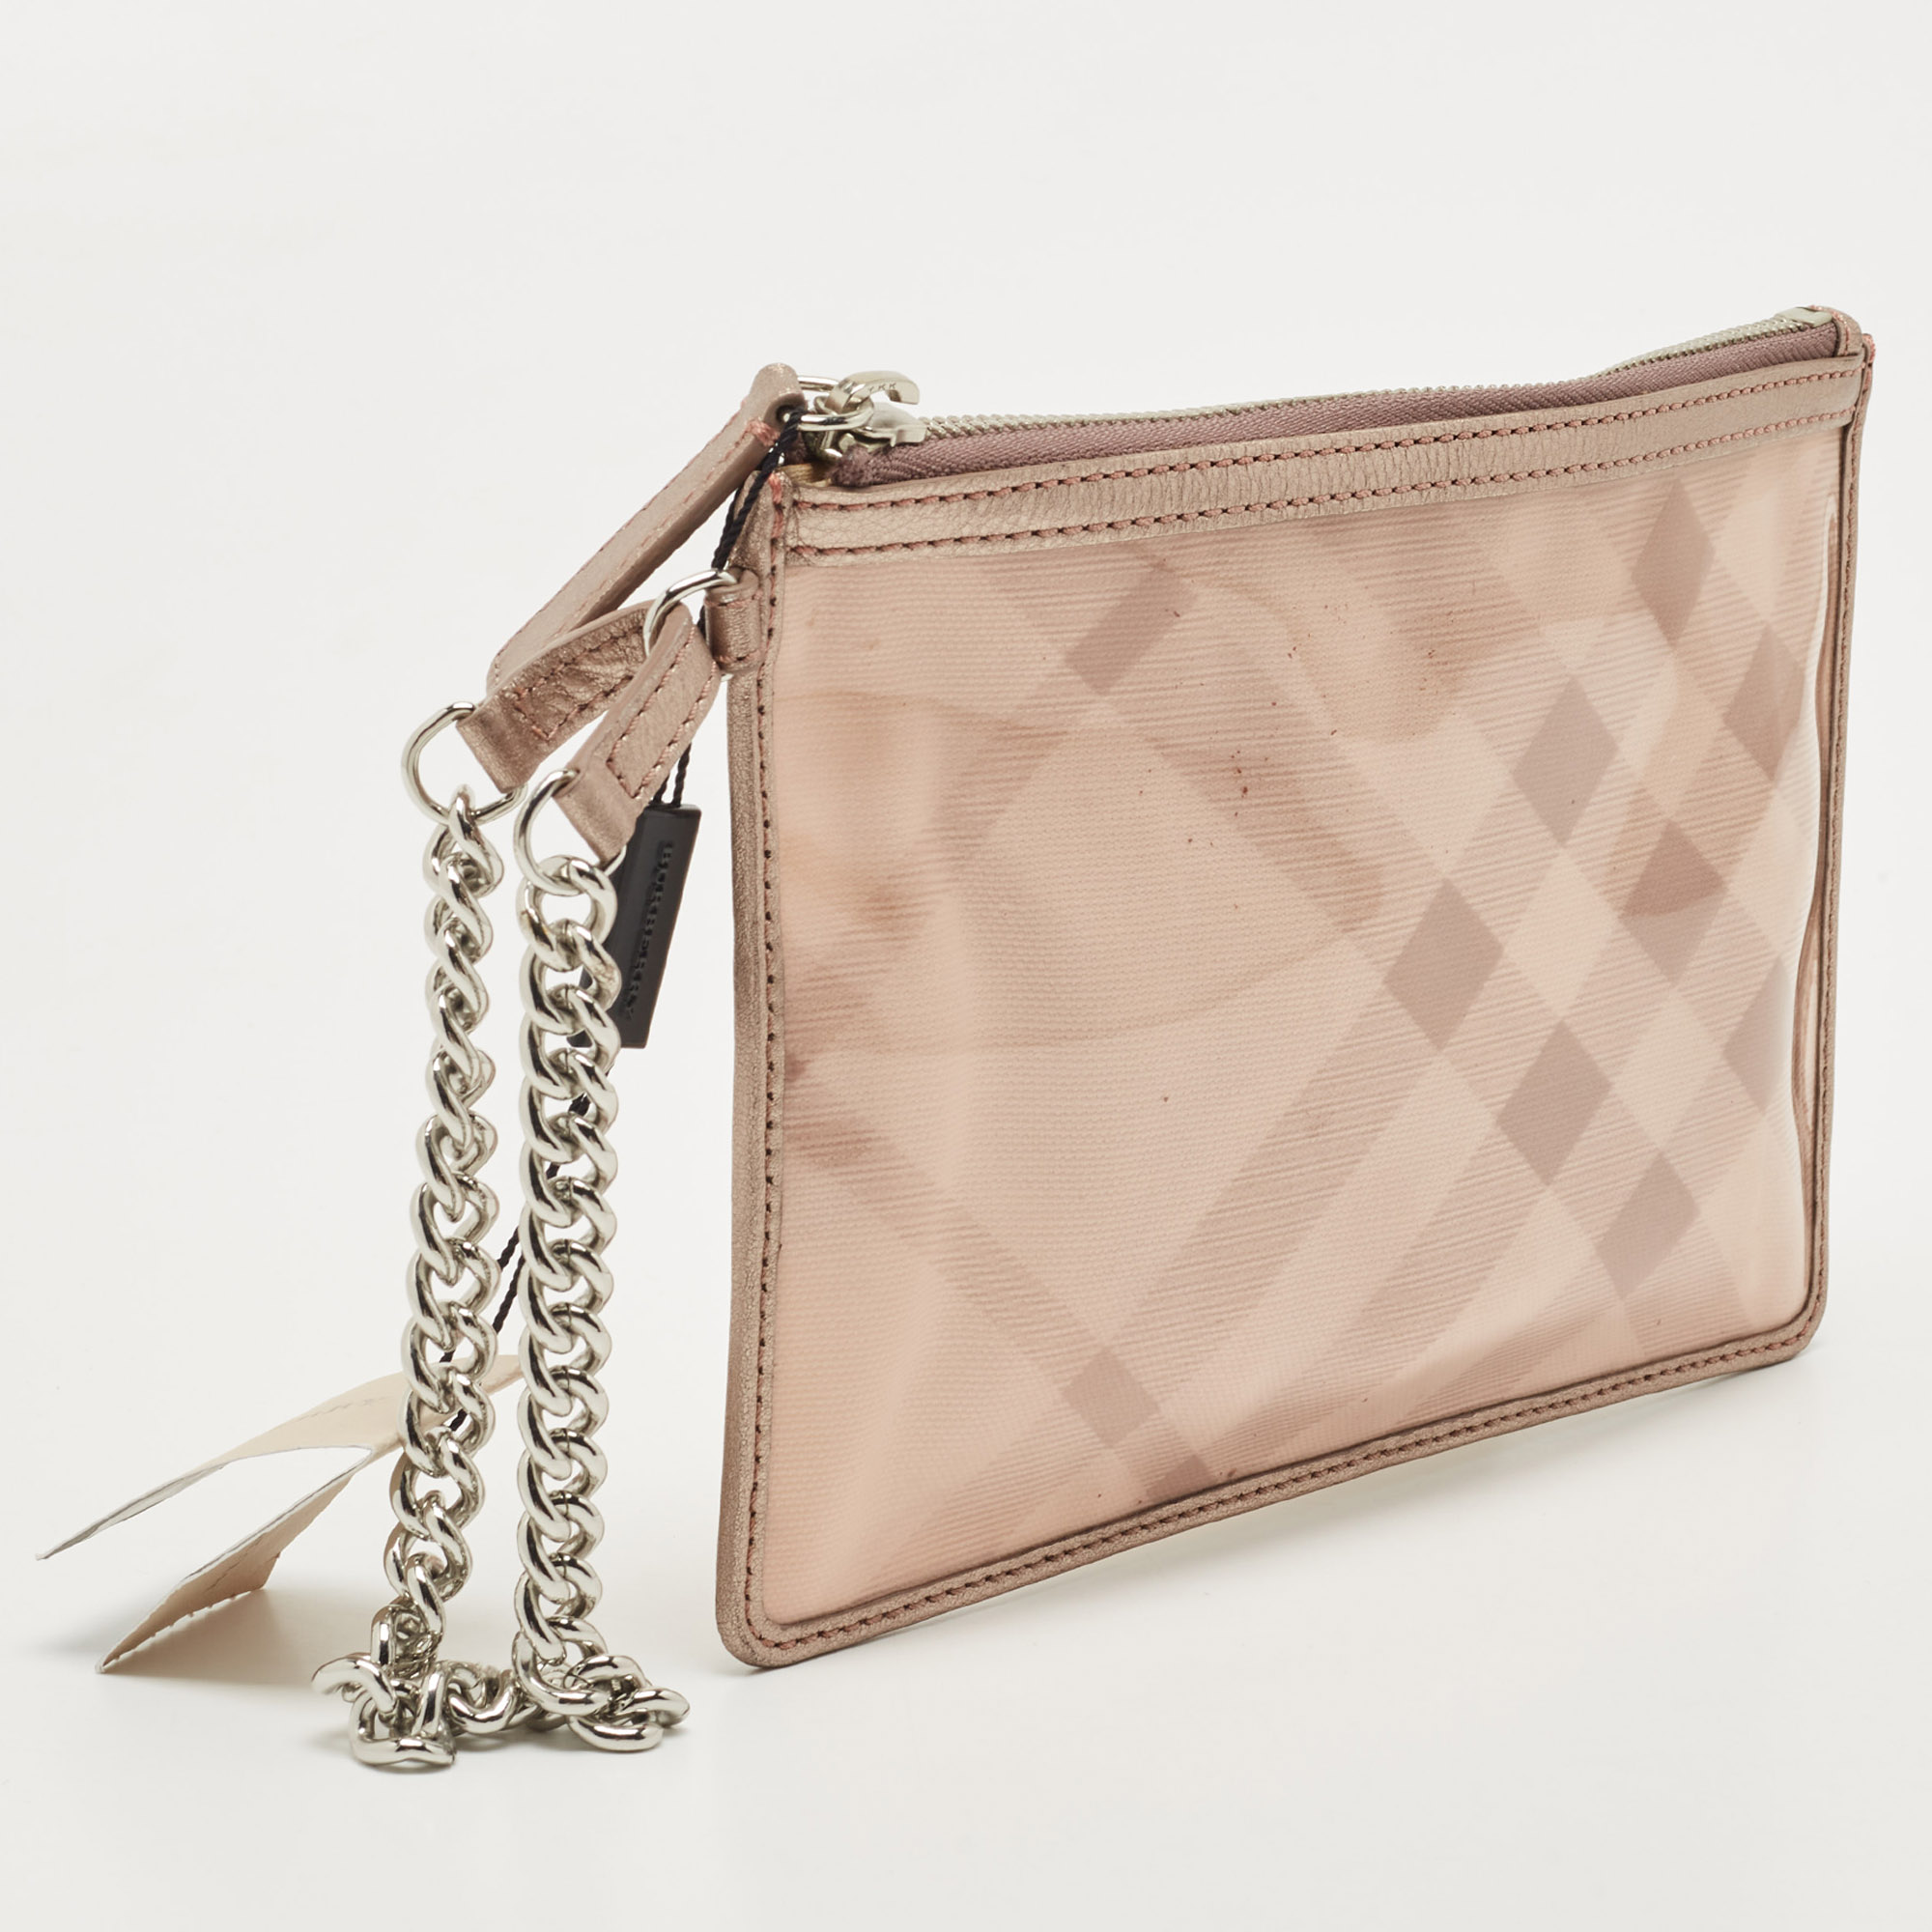 Burberry Metallic Beige/Cleart PVC And Leather Trim Wristlet Pouch